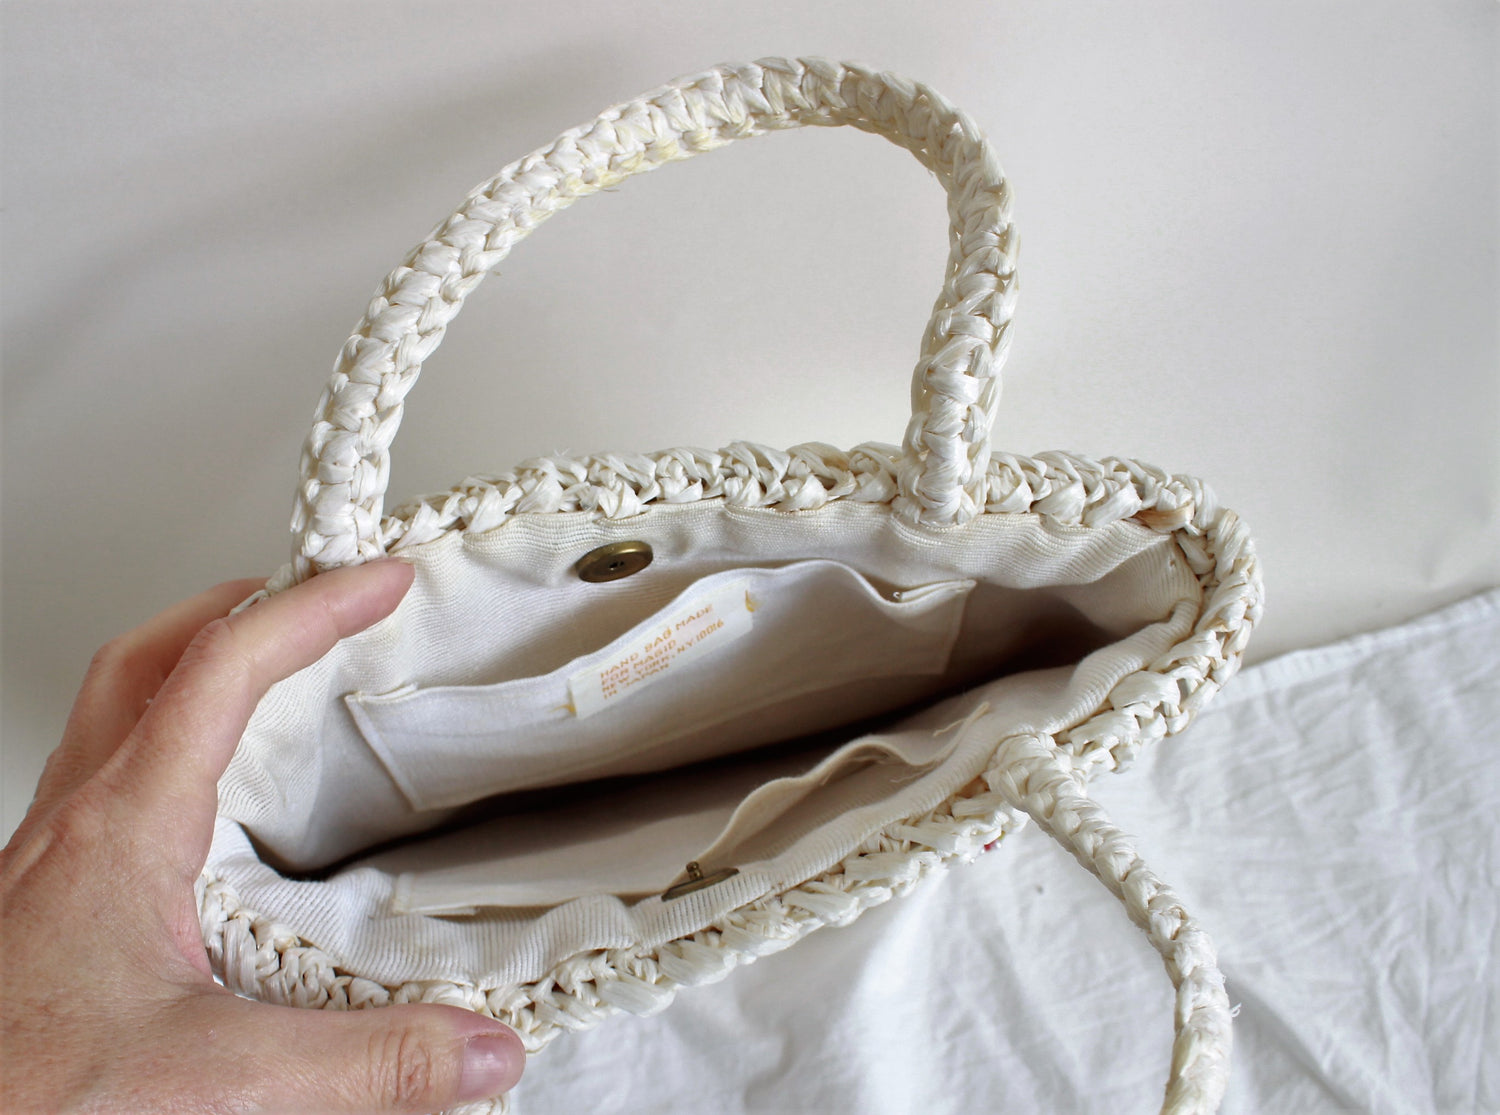 Vintage 1960s White Straw Purse With Strawberries by Magid